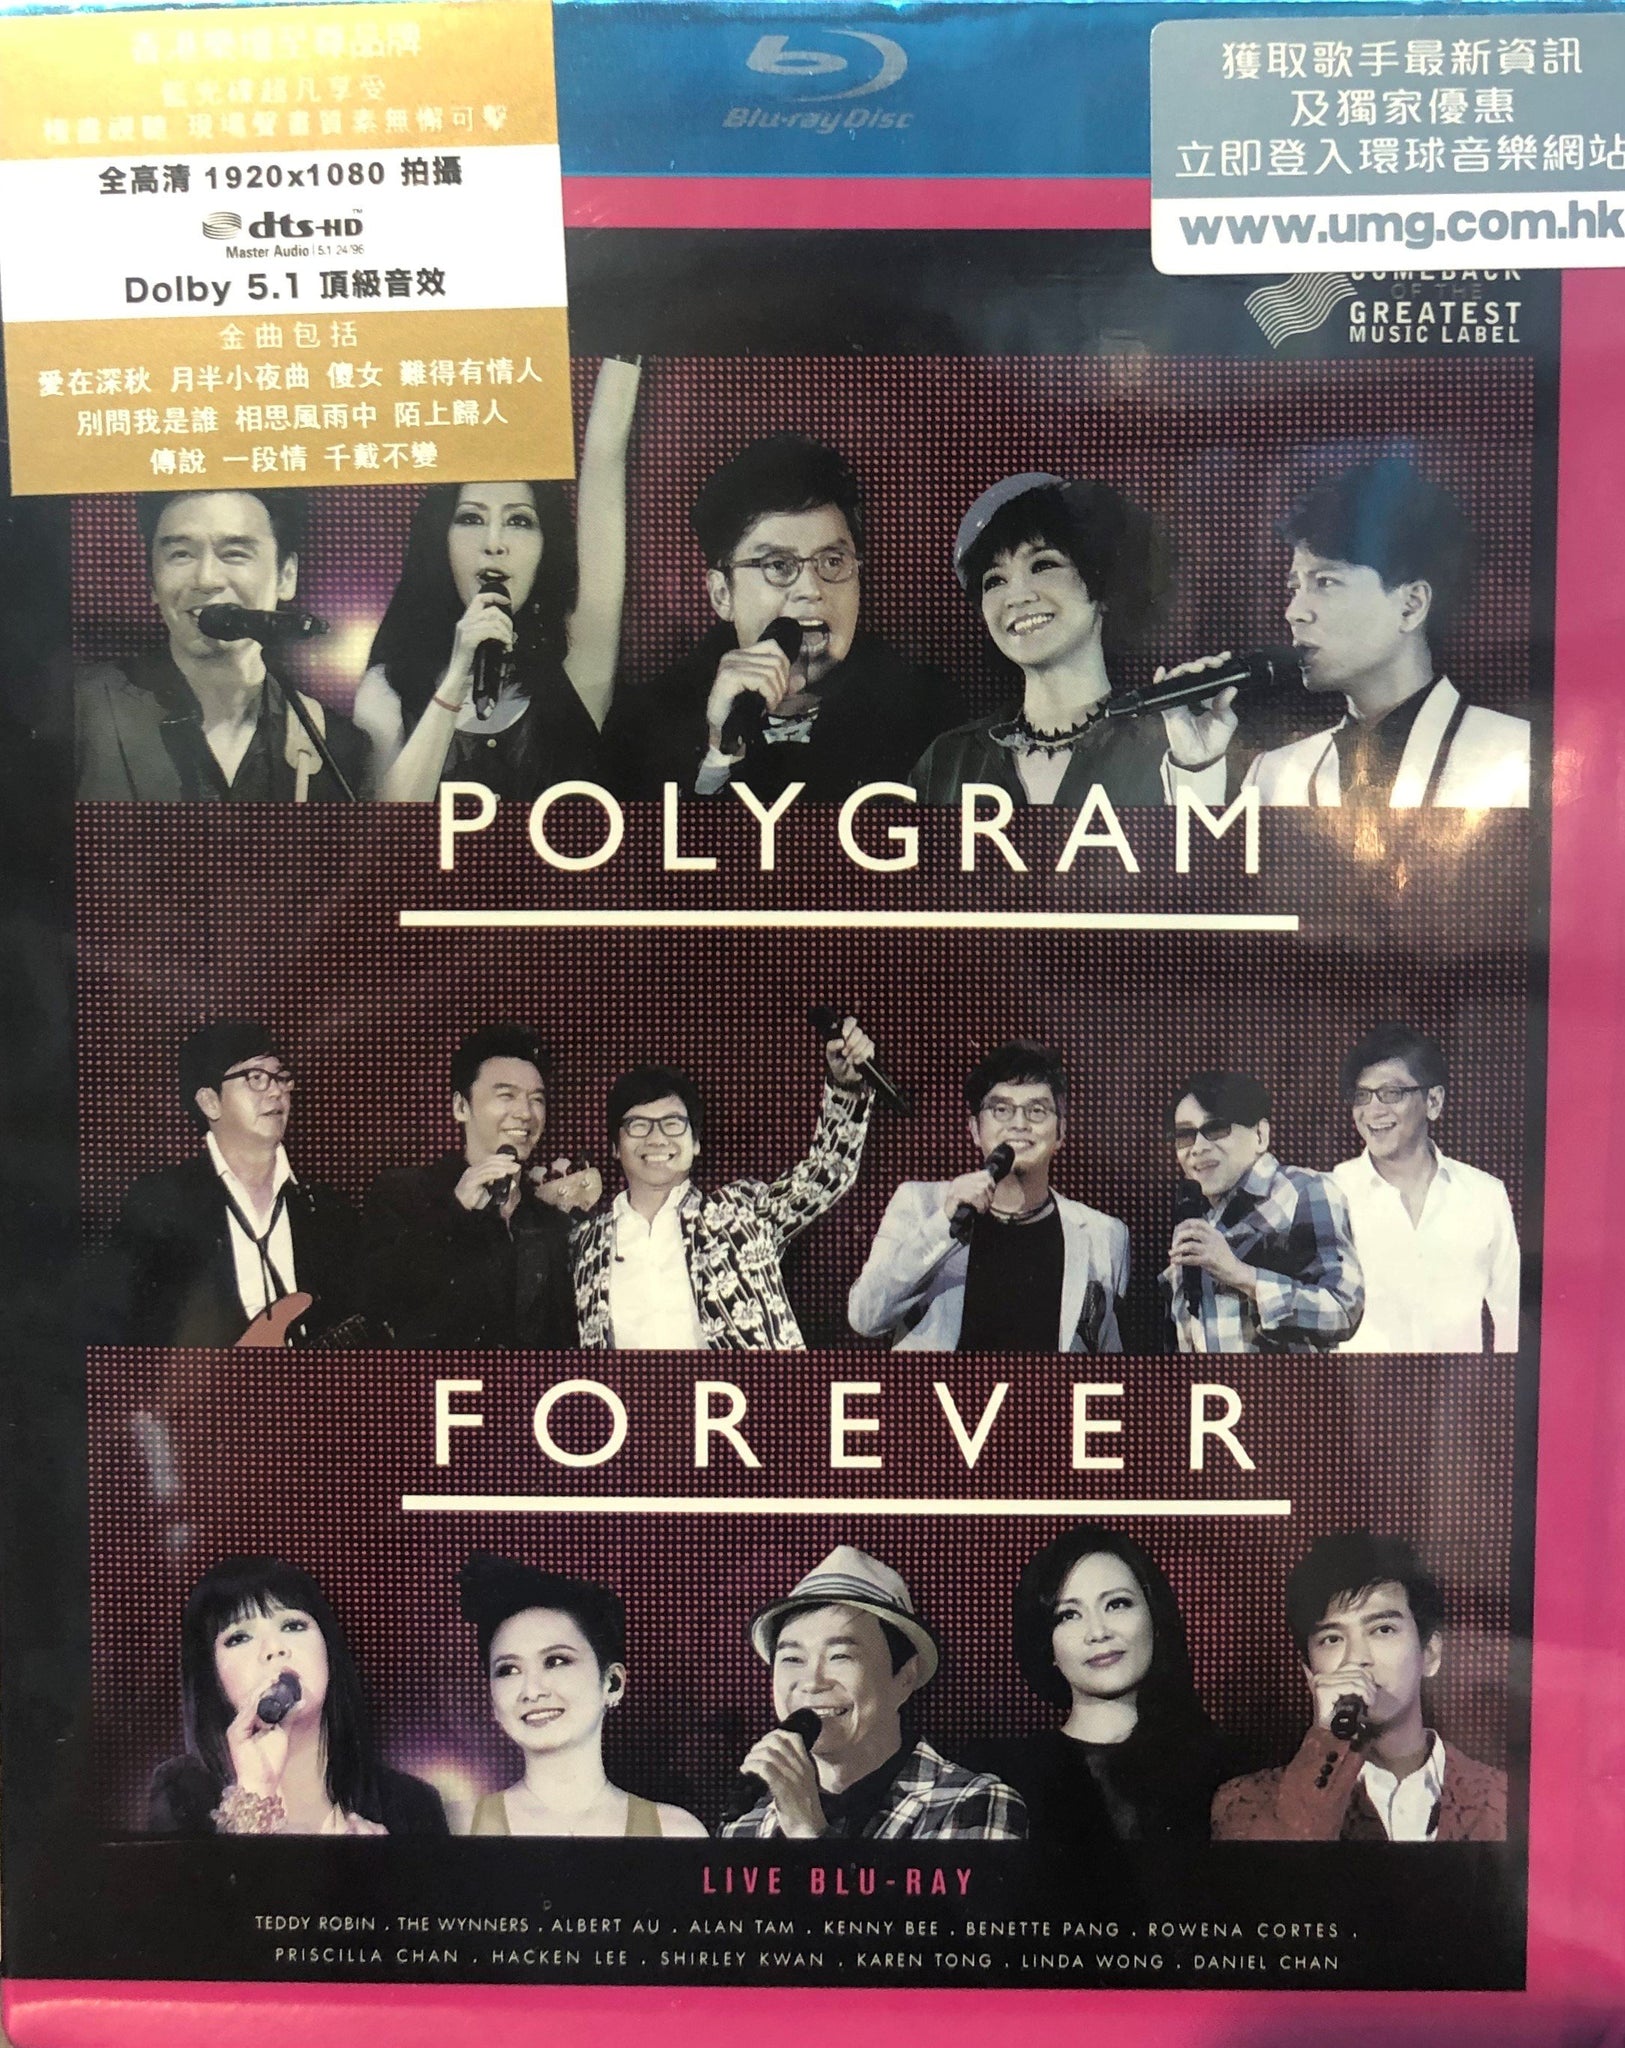 Polygram Forever Live - Various Artists (BLU-RAY) Region Free